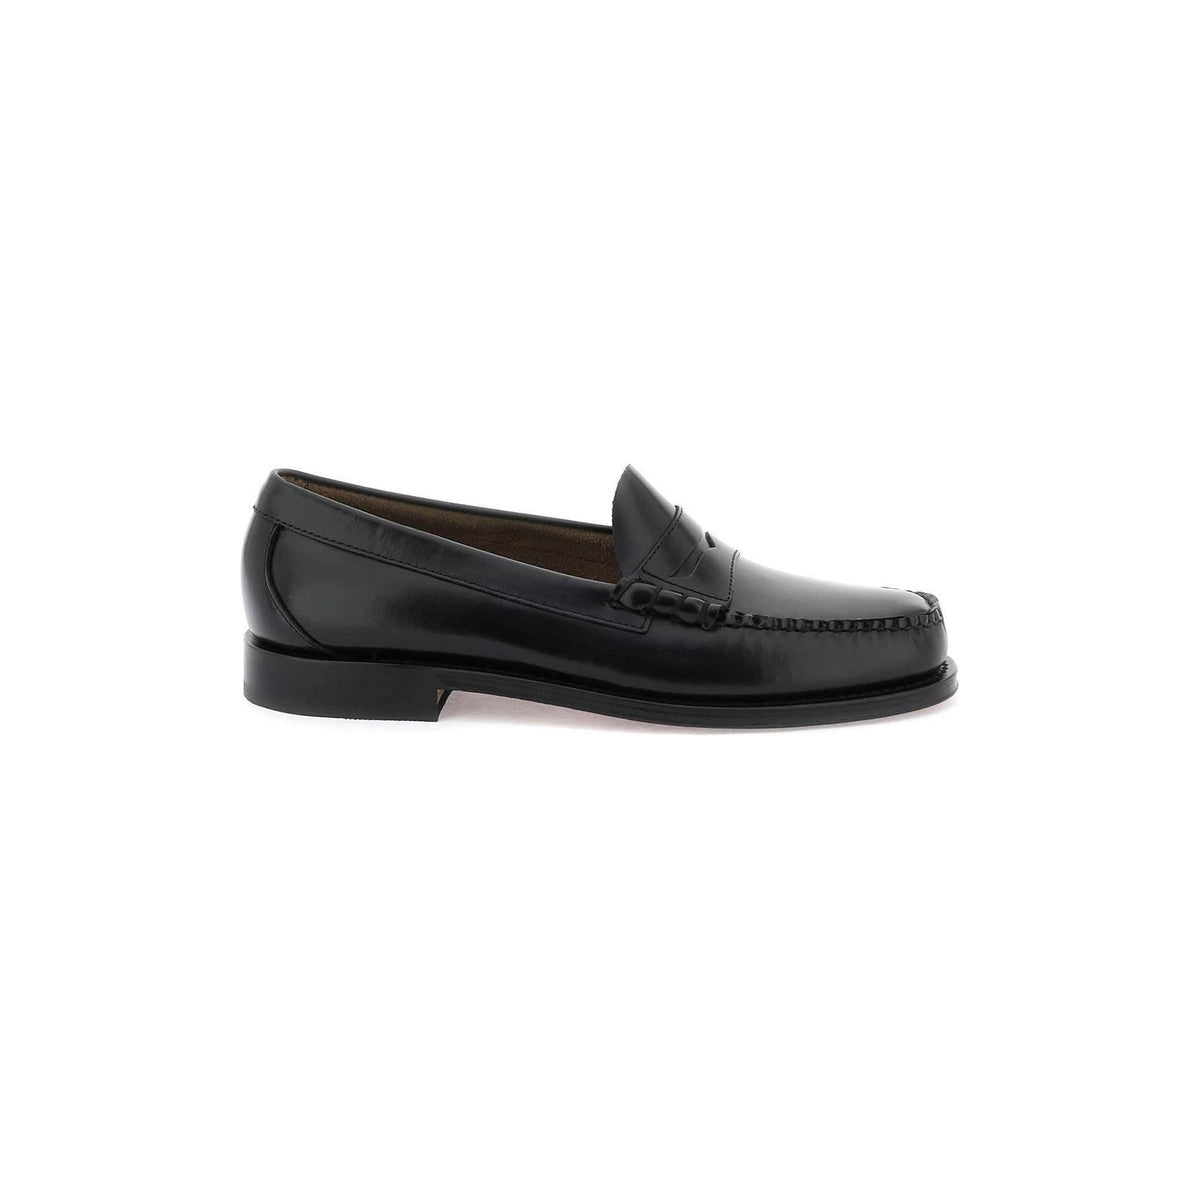 G.H. BASS - Black Handcrafted Leather Weejuns Larson Penny Loafers - JOHN JULIA